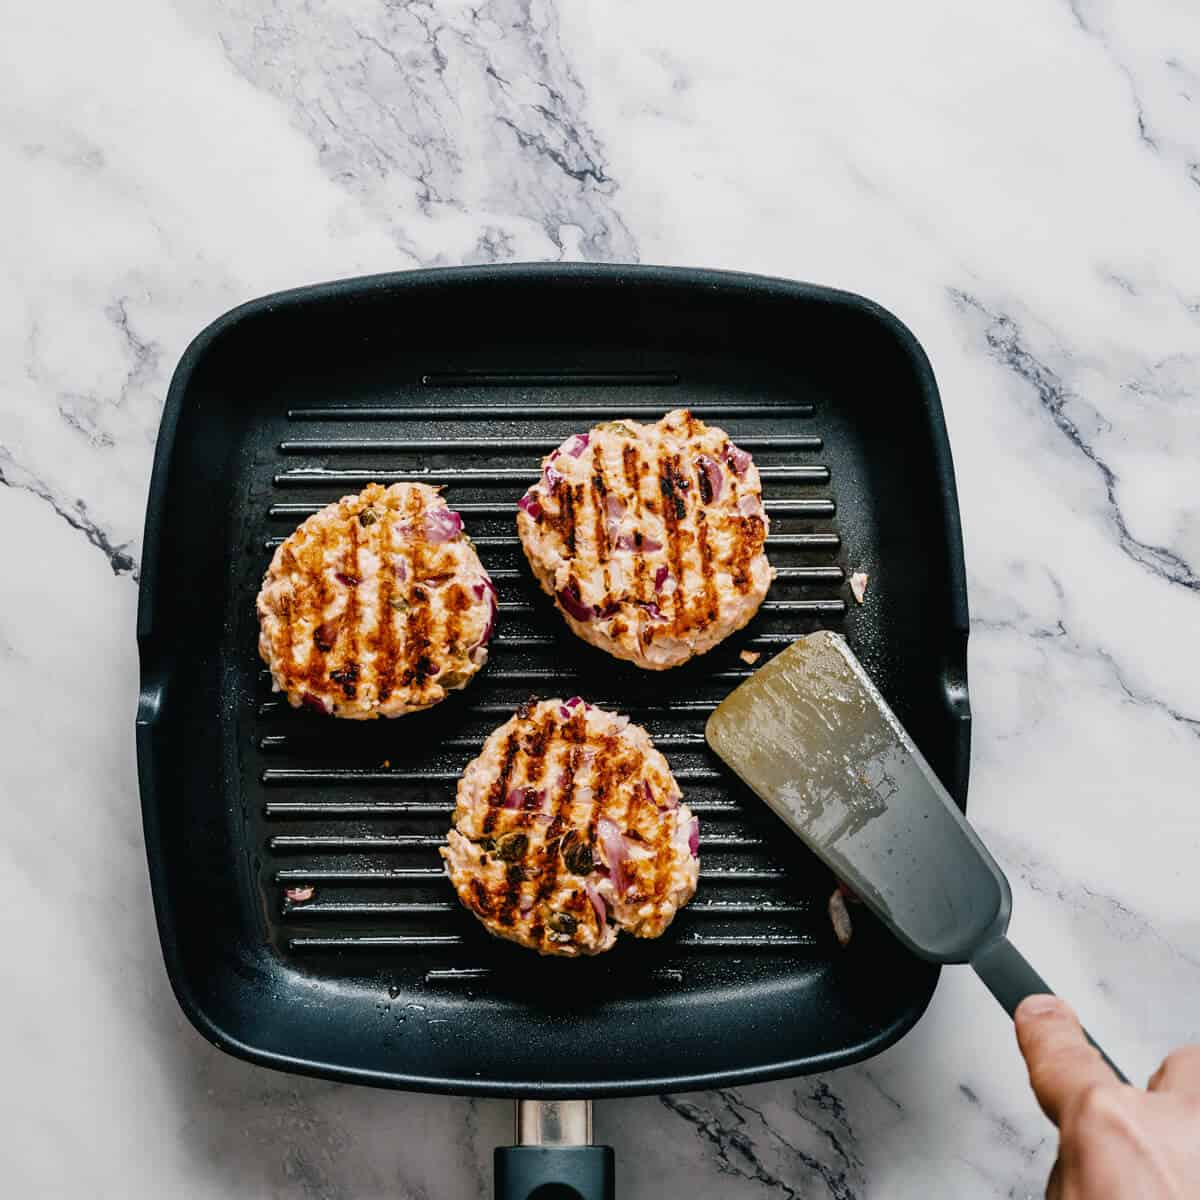 cooking salmon burgers in a grill pan.